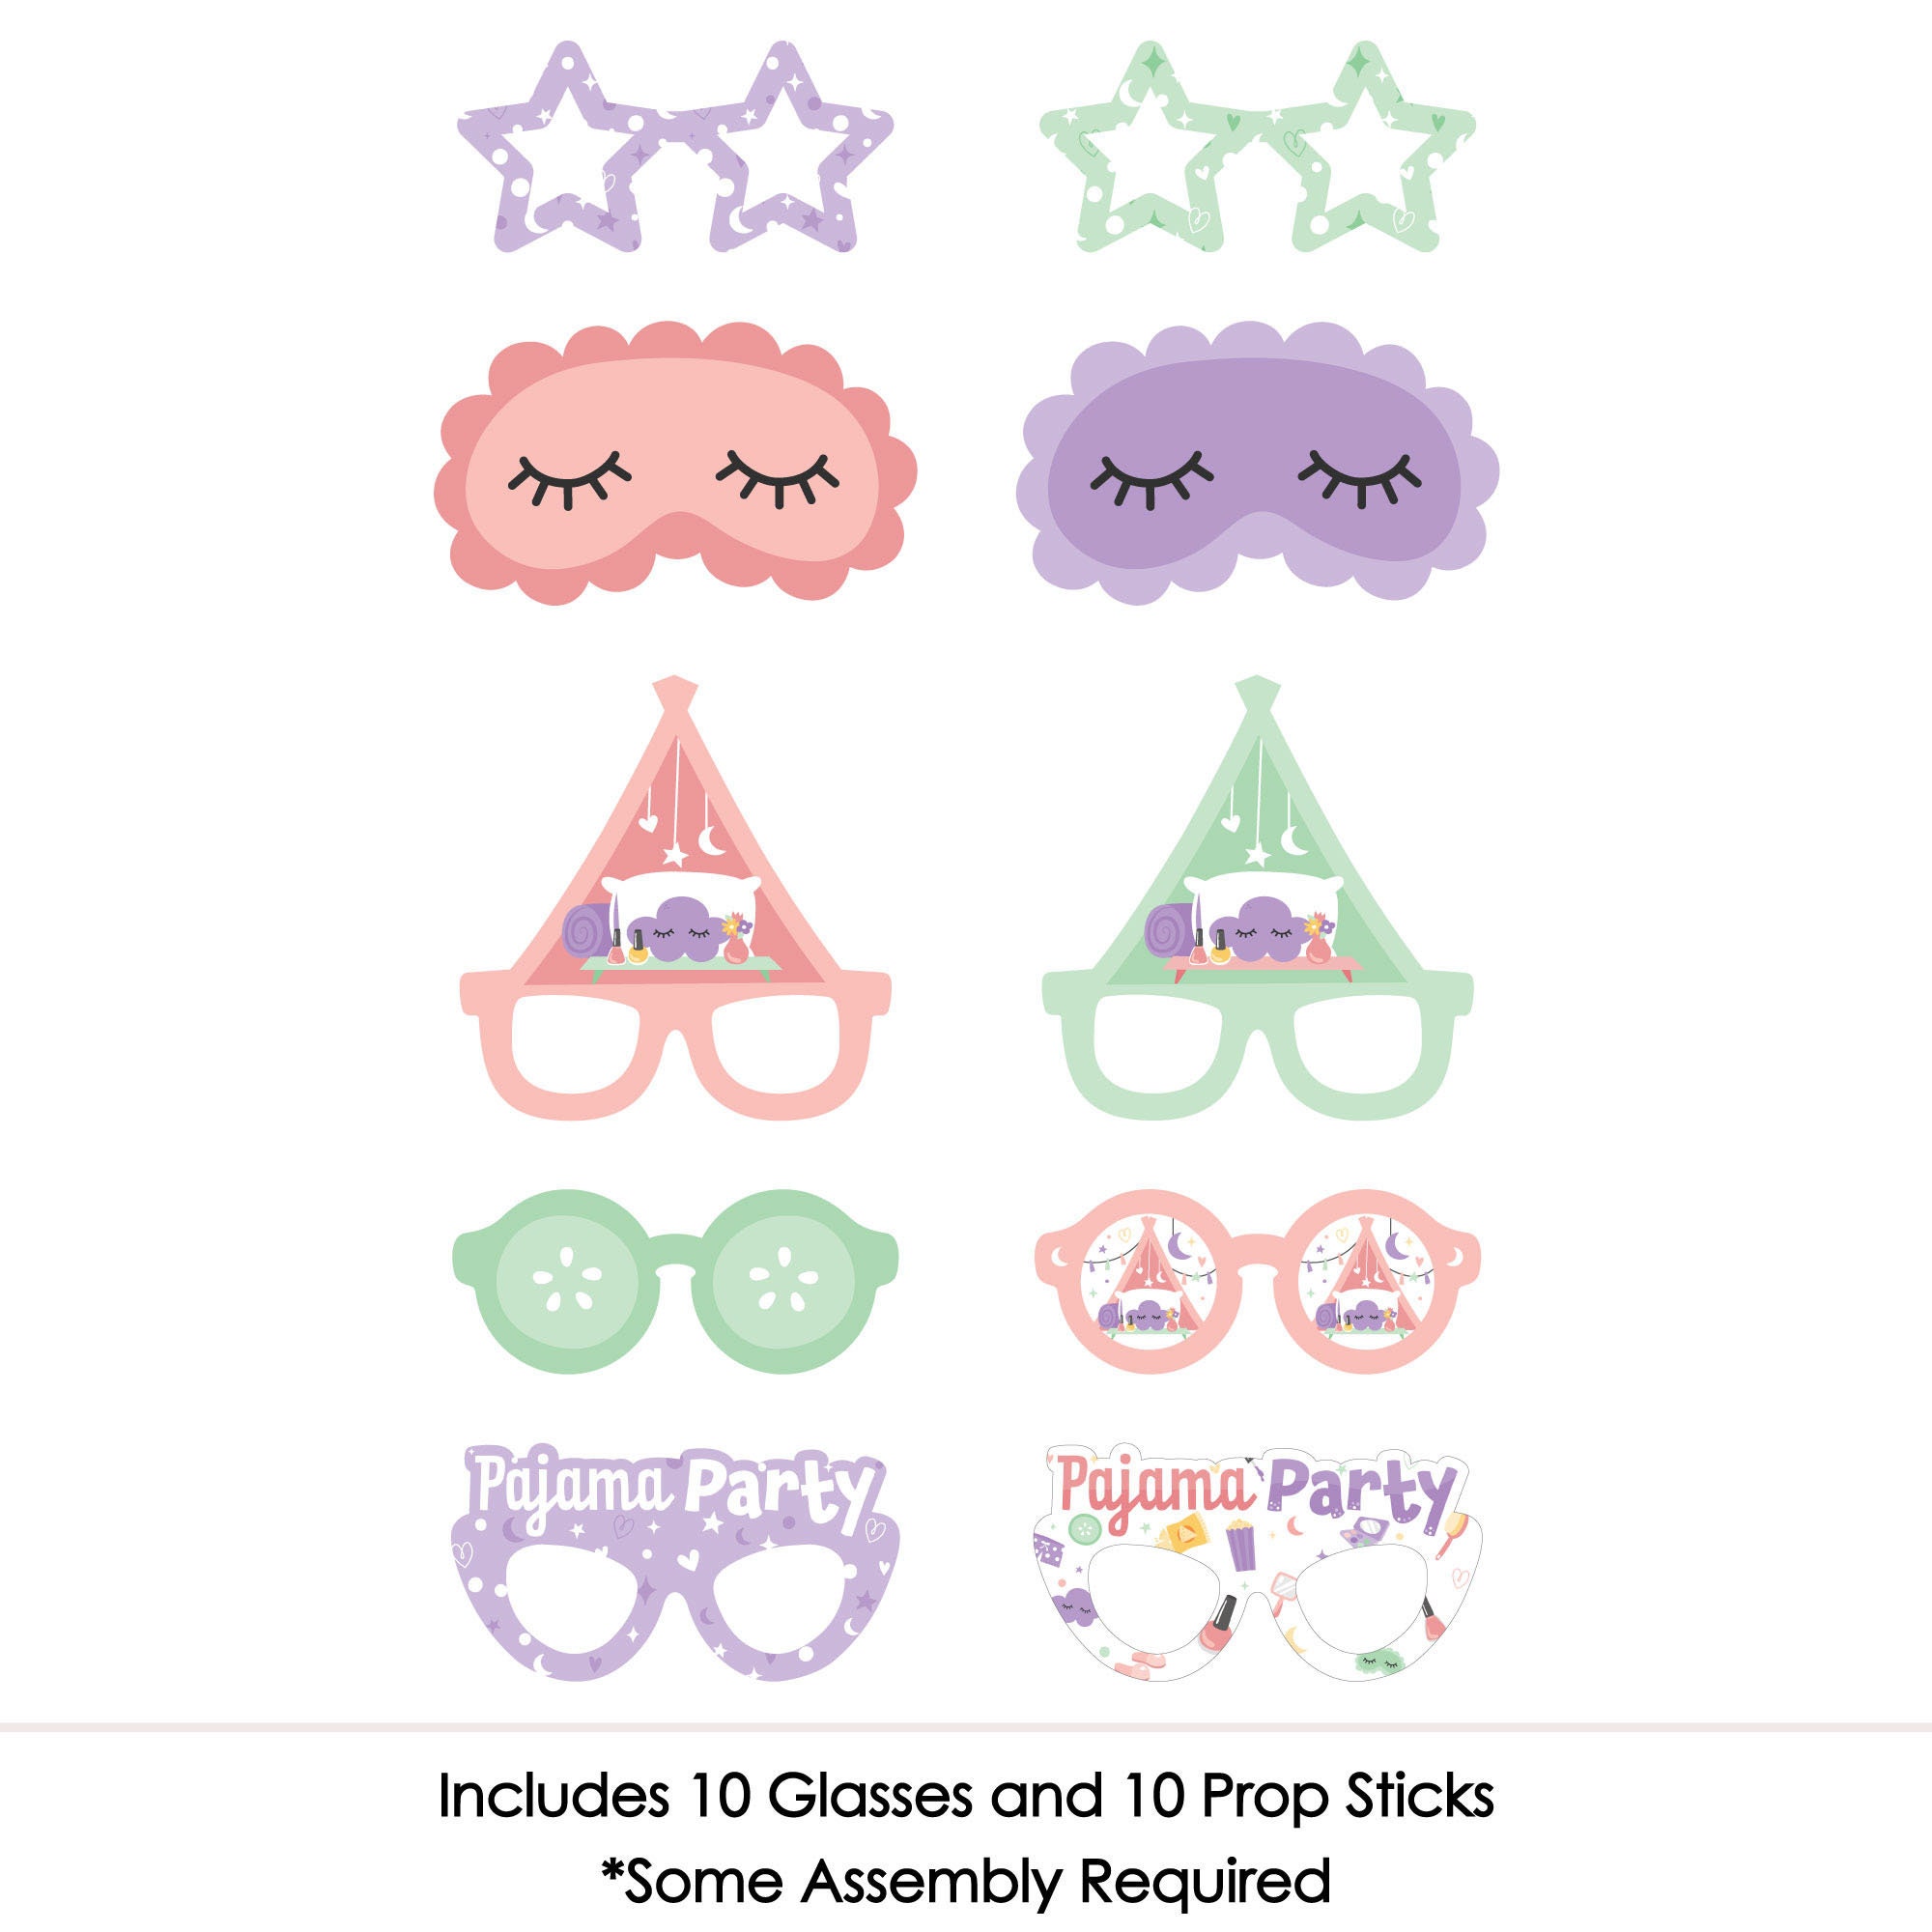 Big Dot of Happiness Pajama Slumber Party - Girls Sleepover Birthday Party  Favors and Cupcake Kit - Fabulous Favor Party Pack - 100 Pieces